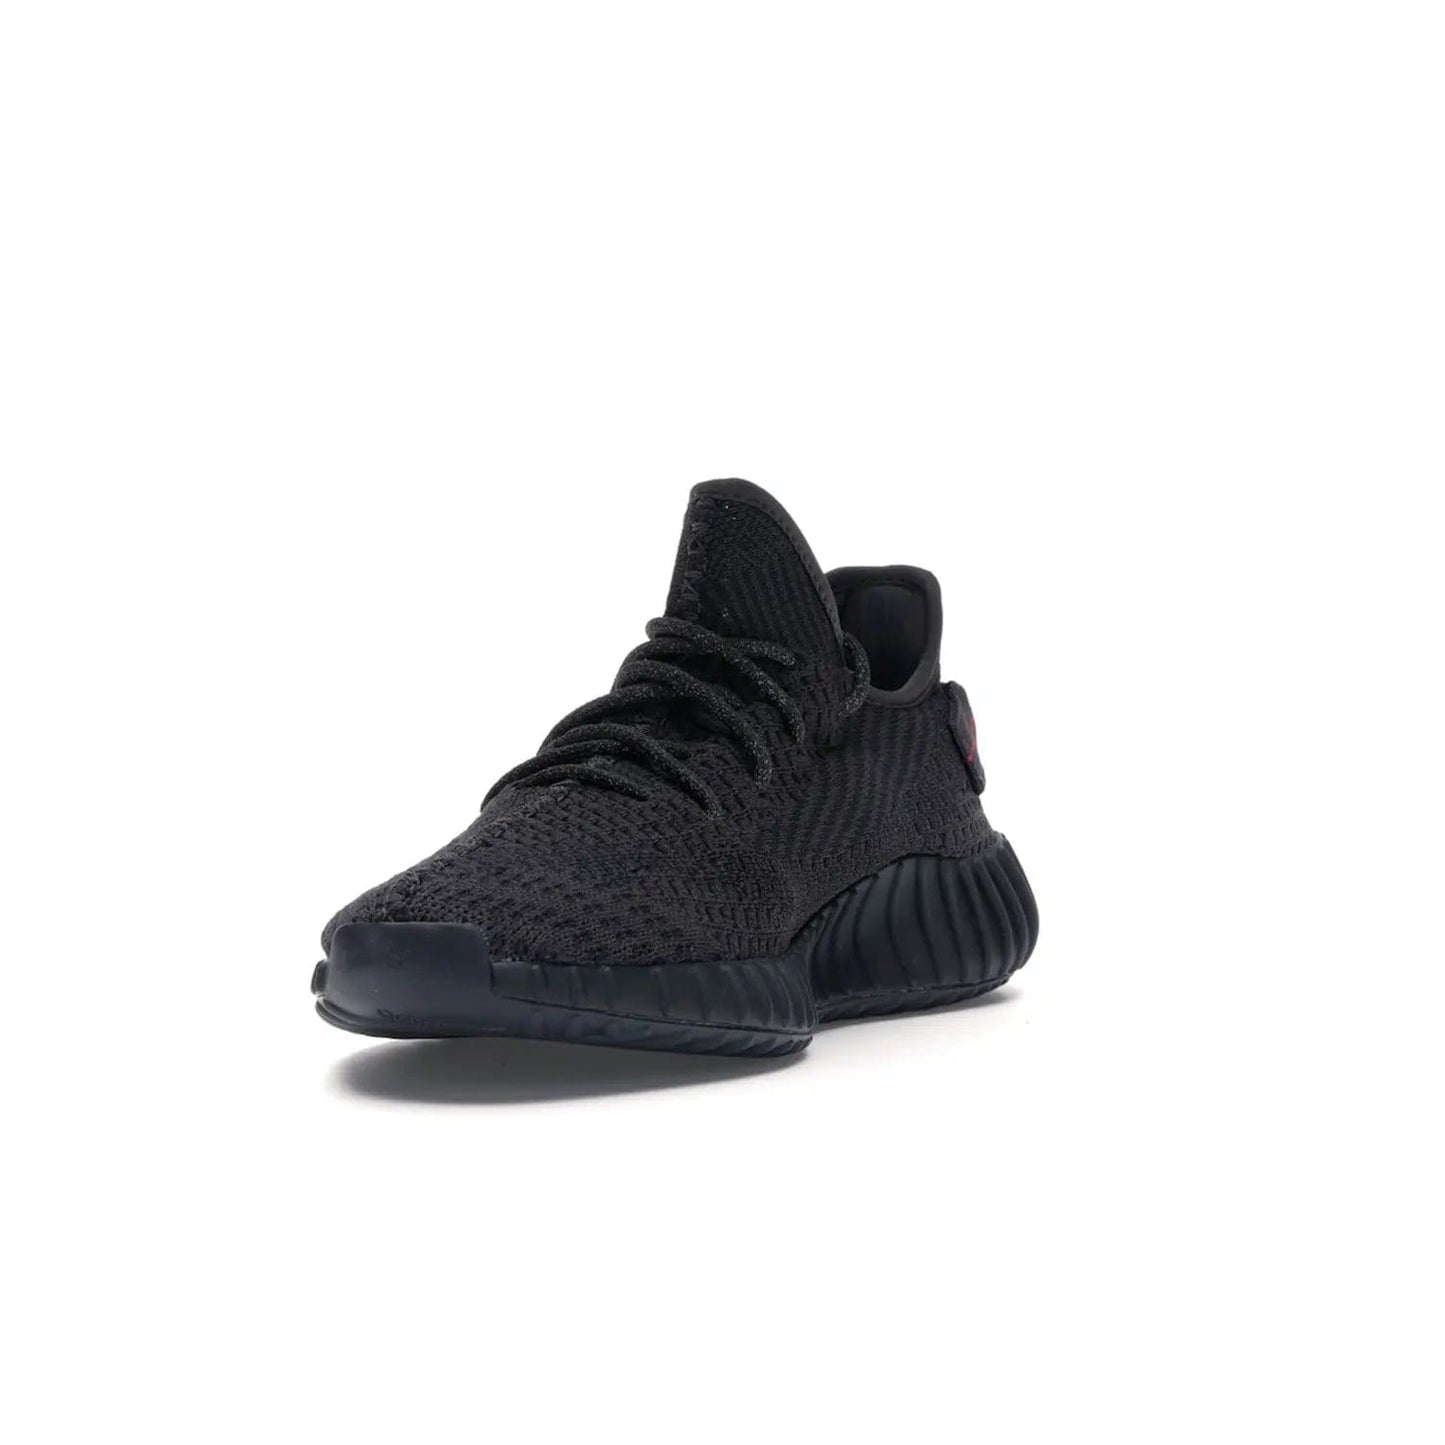 adidas Yeezy Boost 350 V2 Black (Non-Reflective) - Image 13 - Only at www.BallersClubKickz.com - A timeless, sleek silhouette crafted from quality materials. The adidas Yeezy Boost 350 V2 Black (Non-Reflective) brings style and sophistication. Get yours now!